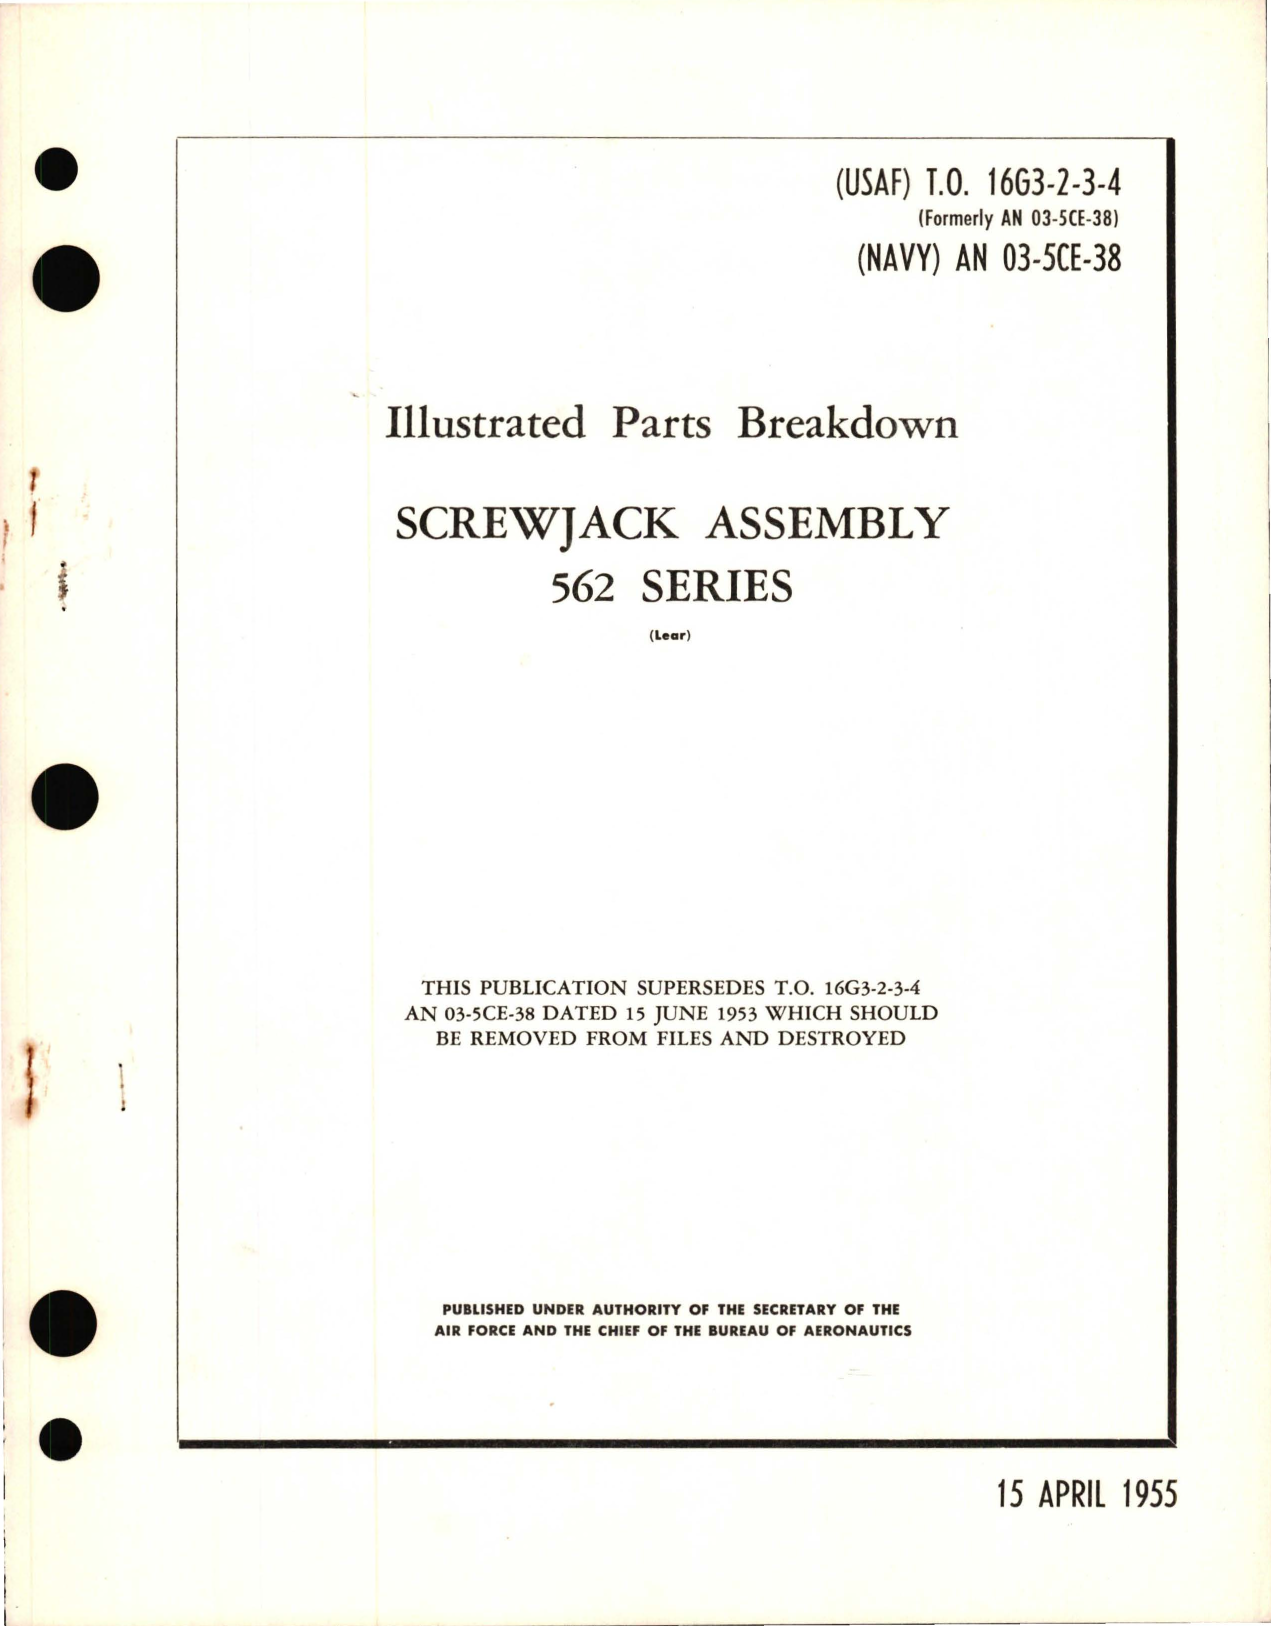 Sample page 1 from AirCorps Library document: Illustrated Parts Breakdown for Screwjack Assembly 562 Series